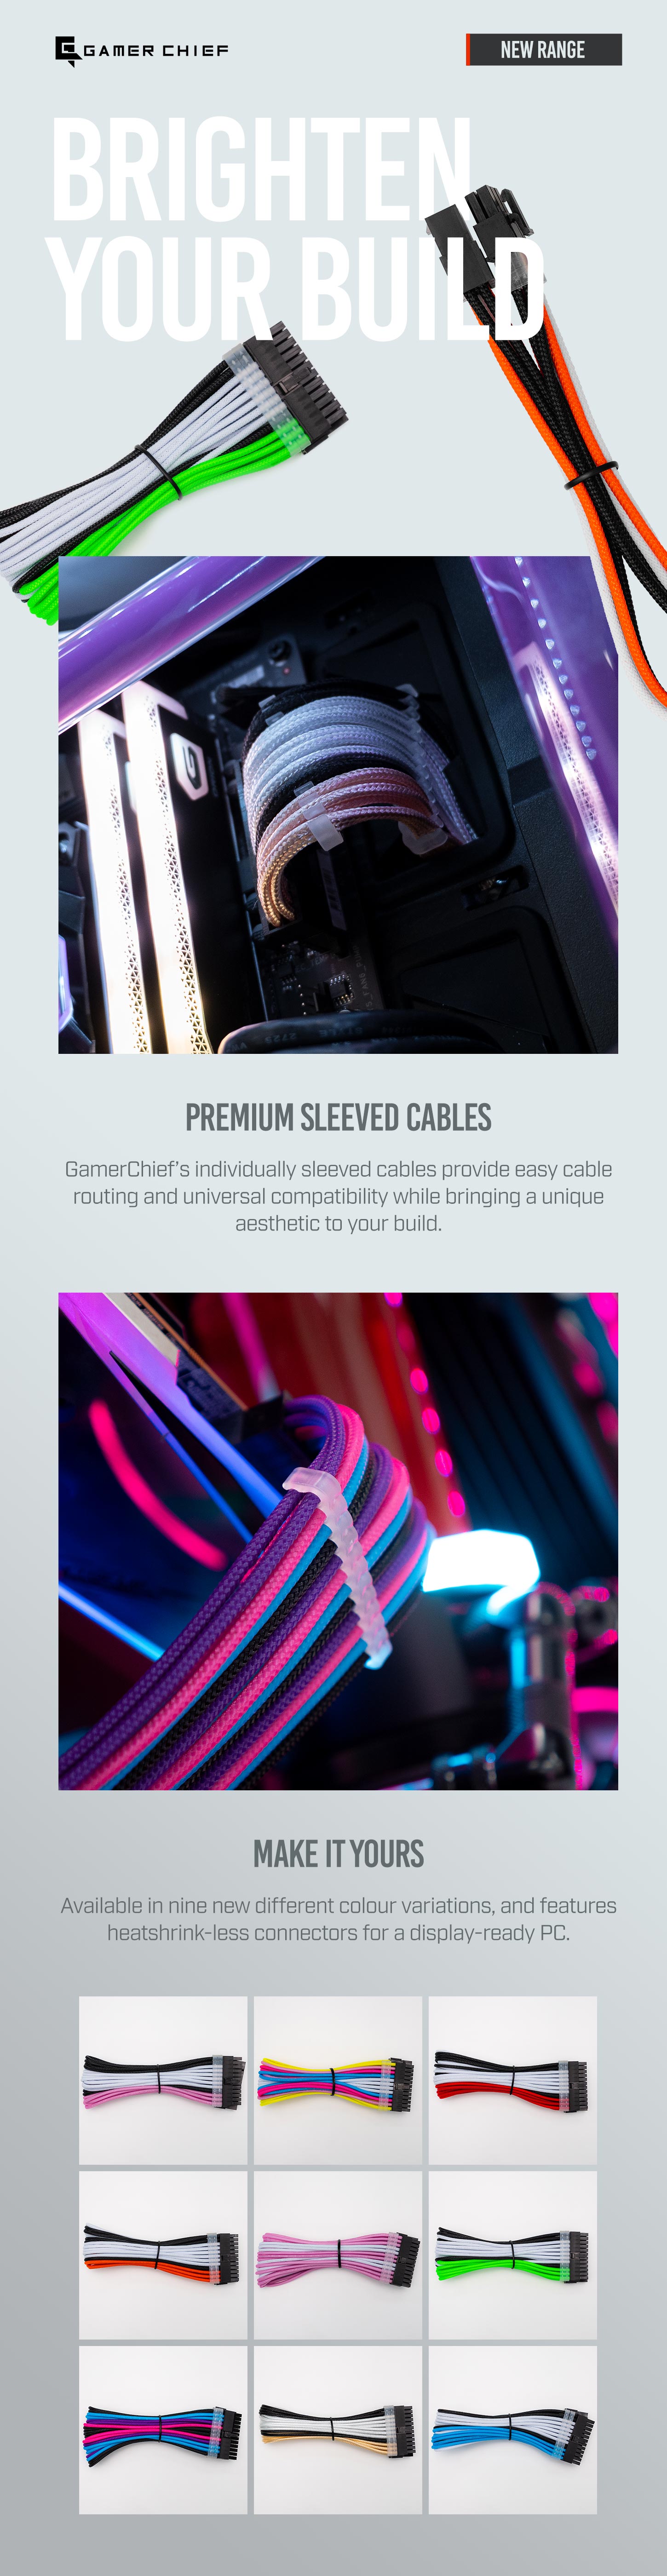 A large marketing image providing additional information about the product GamerChief Elite Series 24-Pin ATX 30cm Sleeved Extension Cable (Pink/White) - Additional alt info not provided